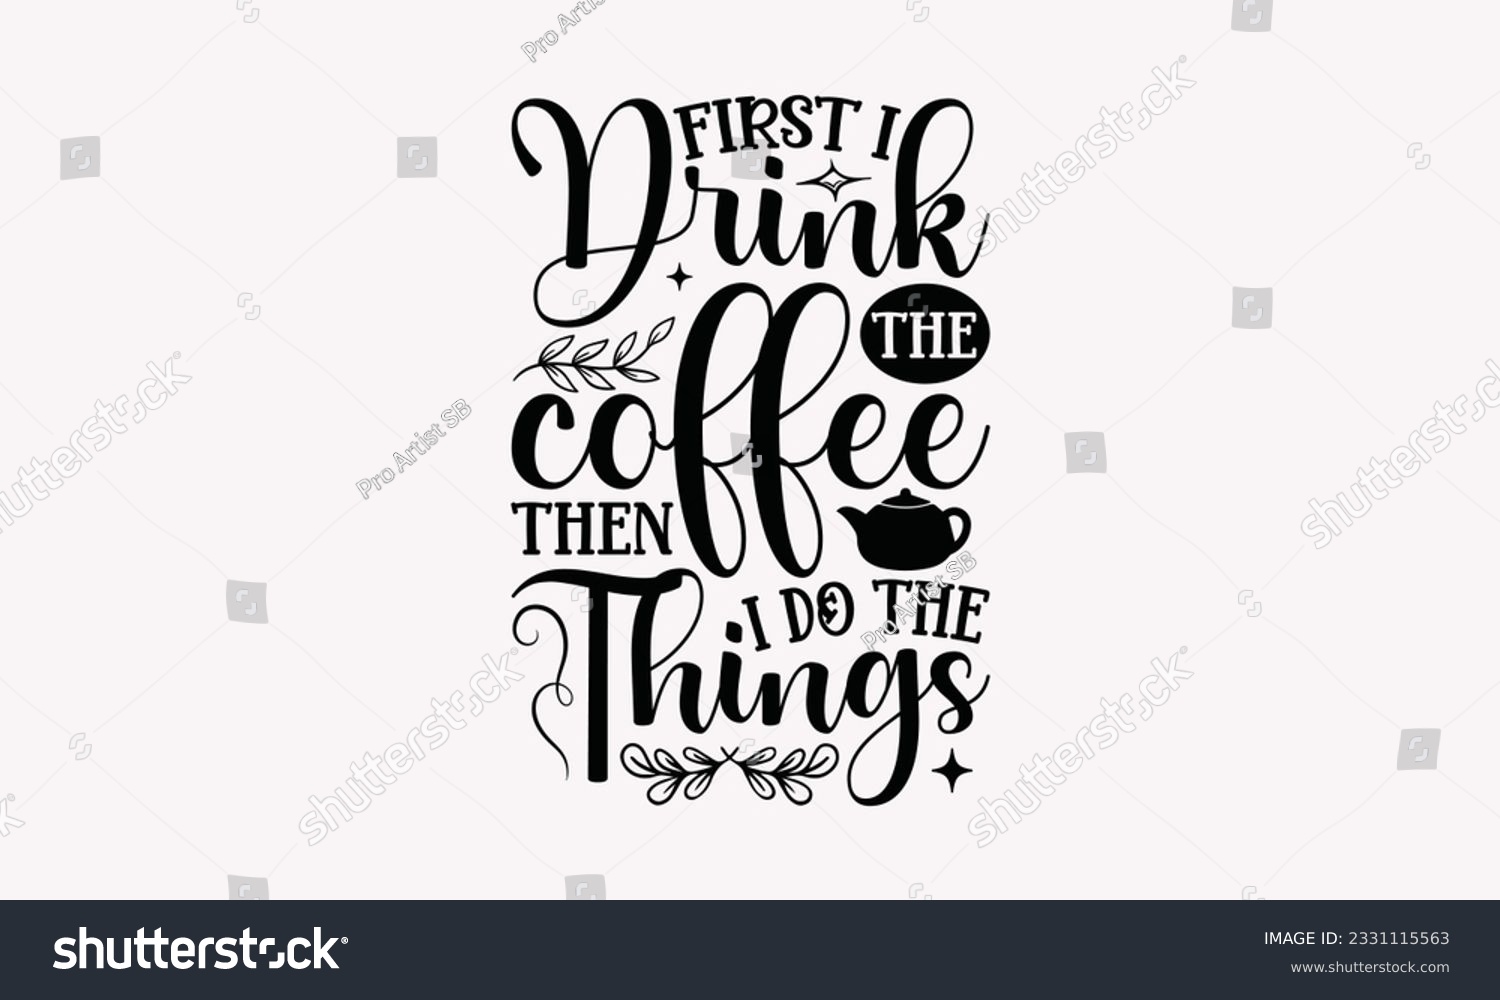 SVG of First I drink the coffee then I do the things - Coffee SVG Design Template, Drink Quotes, Calligraphy graphic design, Typography poster with old style camera and quote. svg